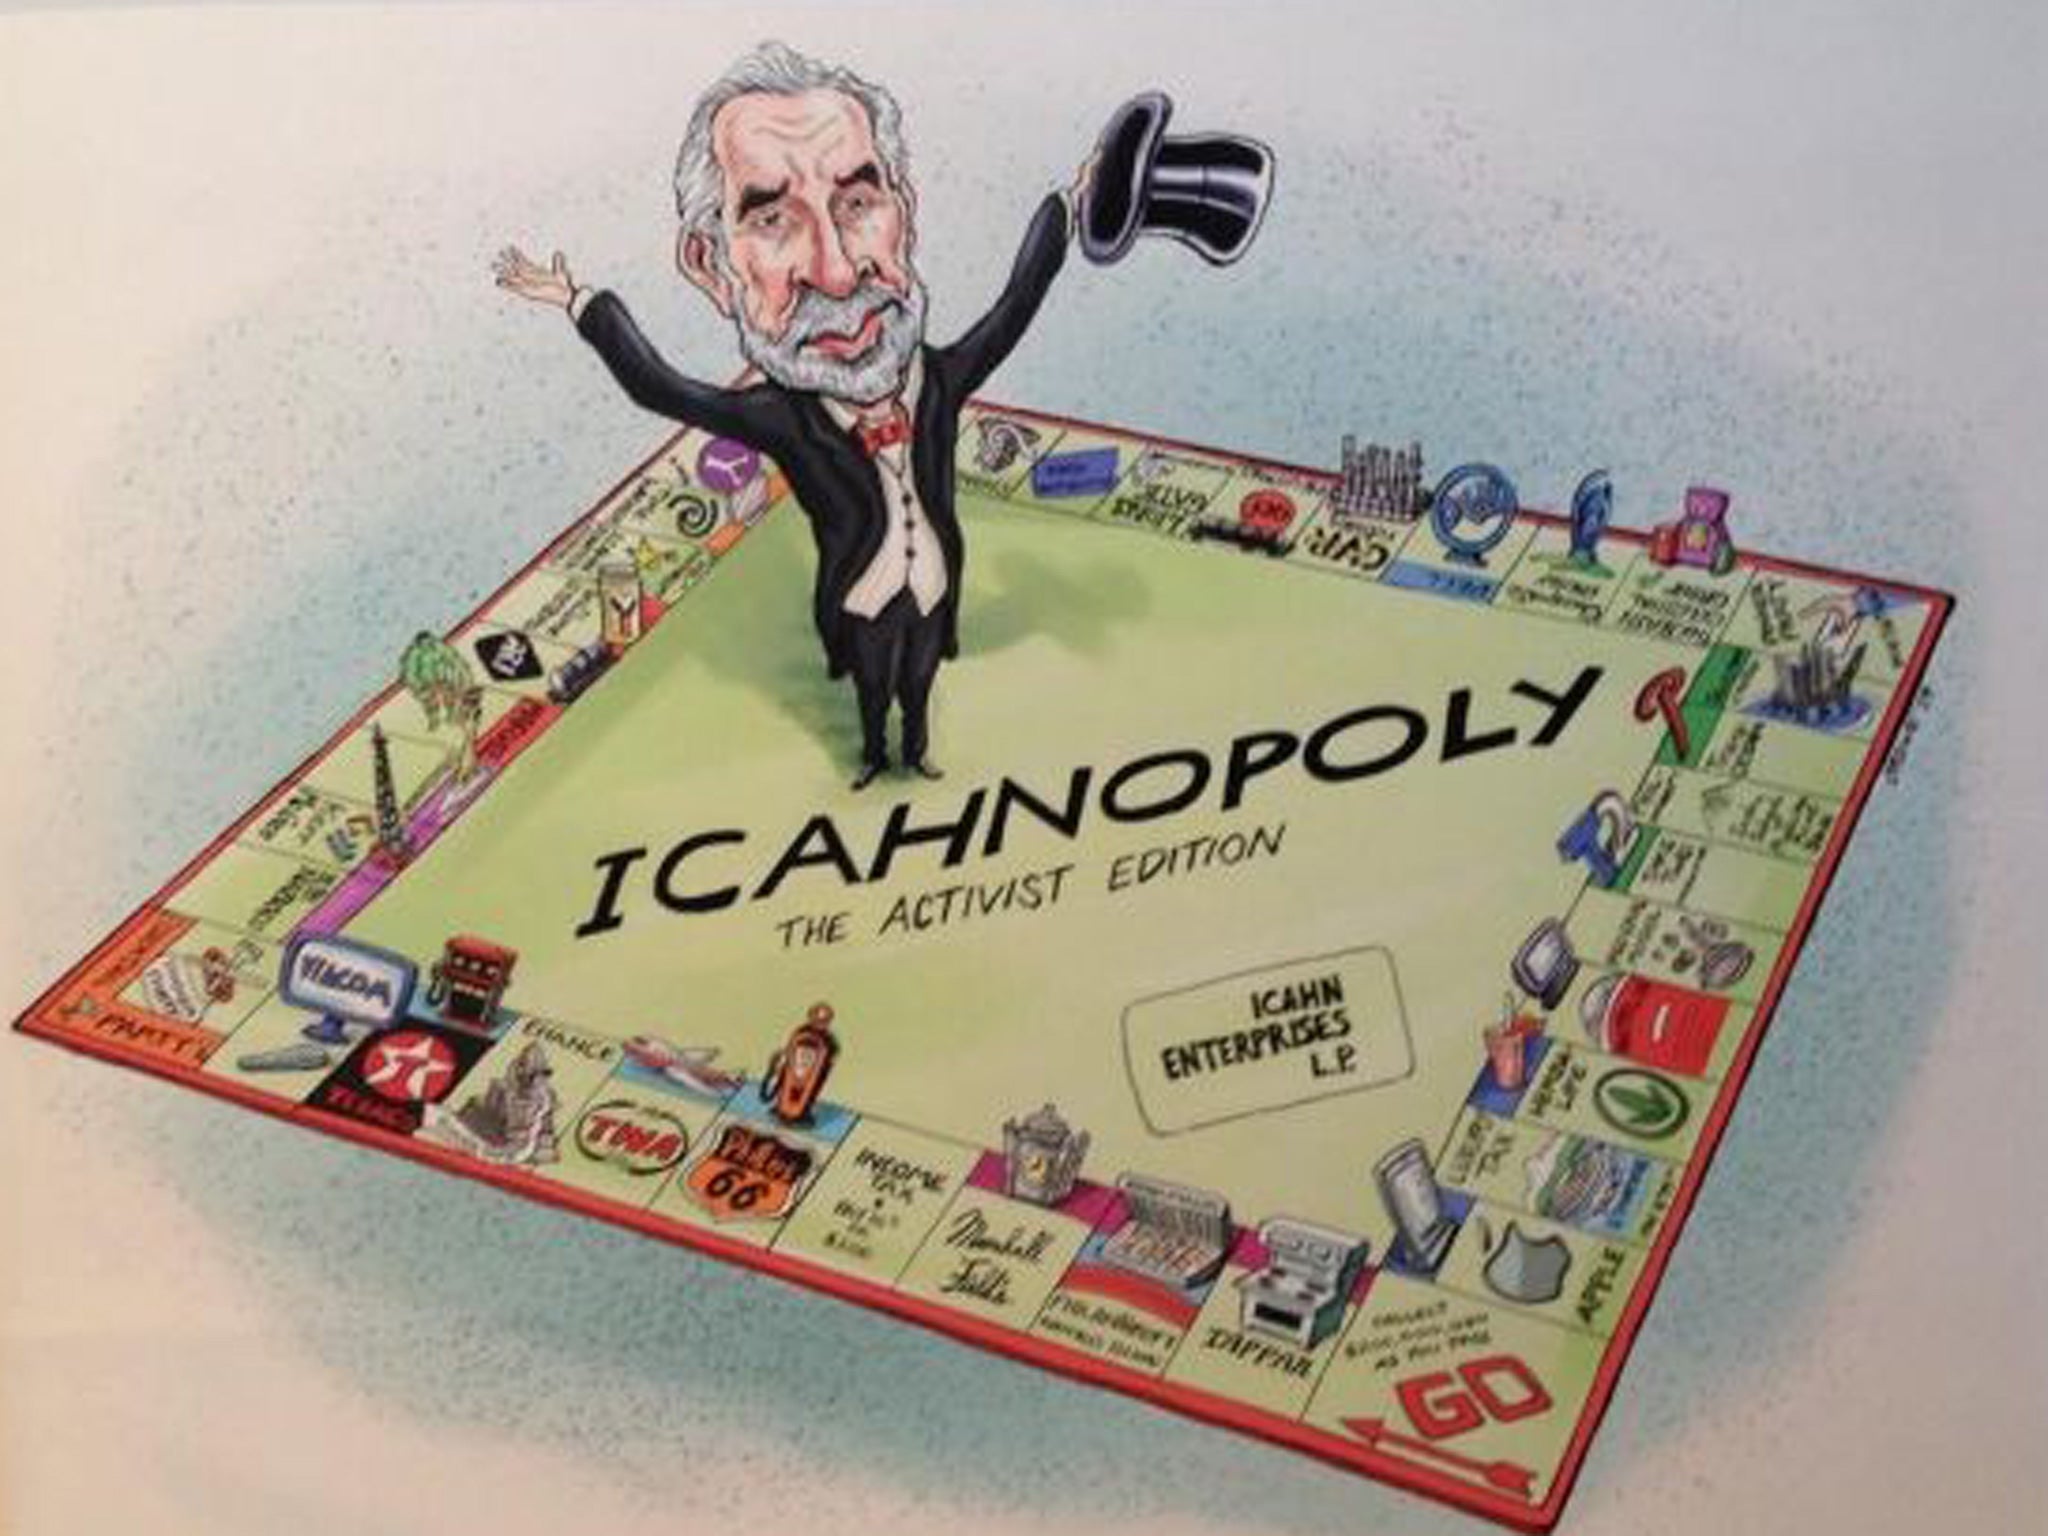 His specially created Monopoly board, ‘the great gift from my daughter’